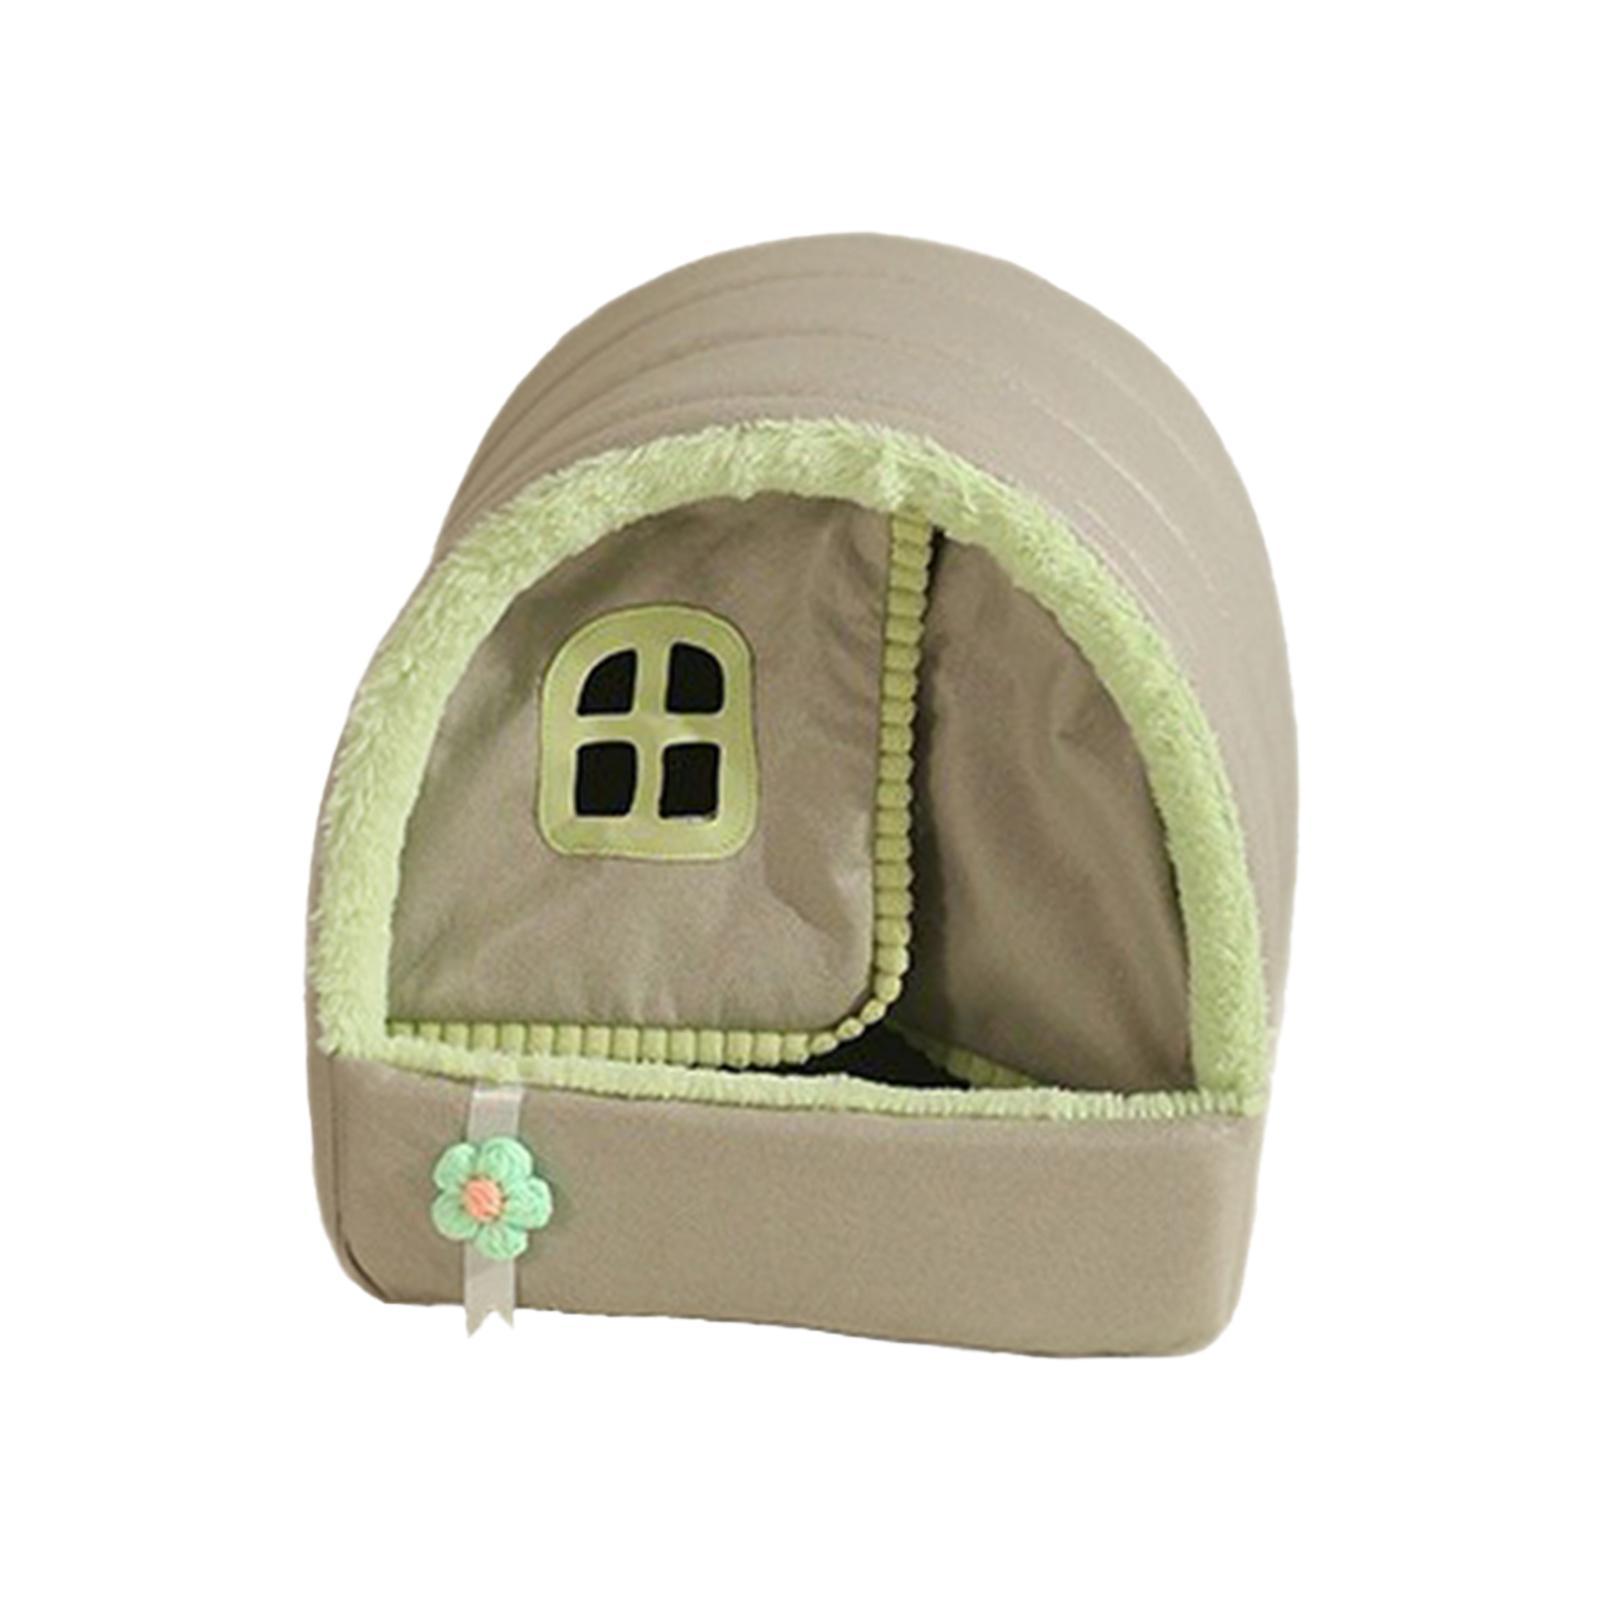 Puppy Cave Cats Condo Hideaway Sturdy Structure Cats Cube Bed for Small Dogs